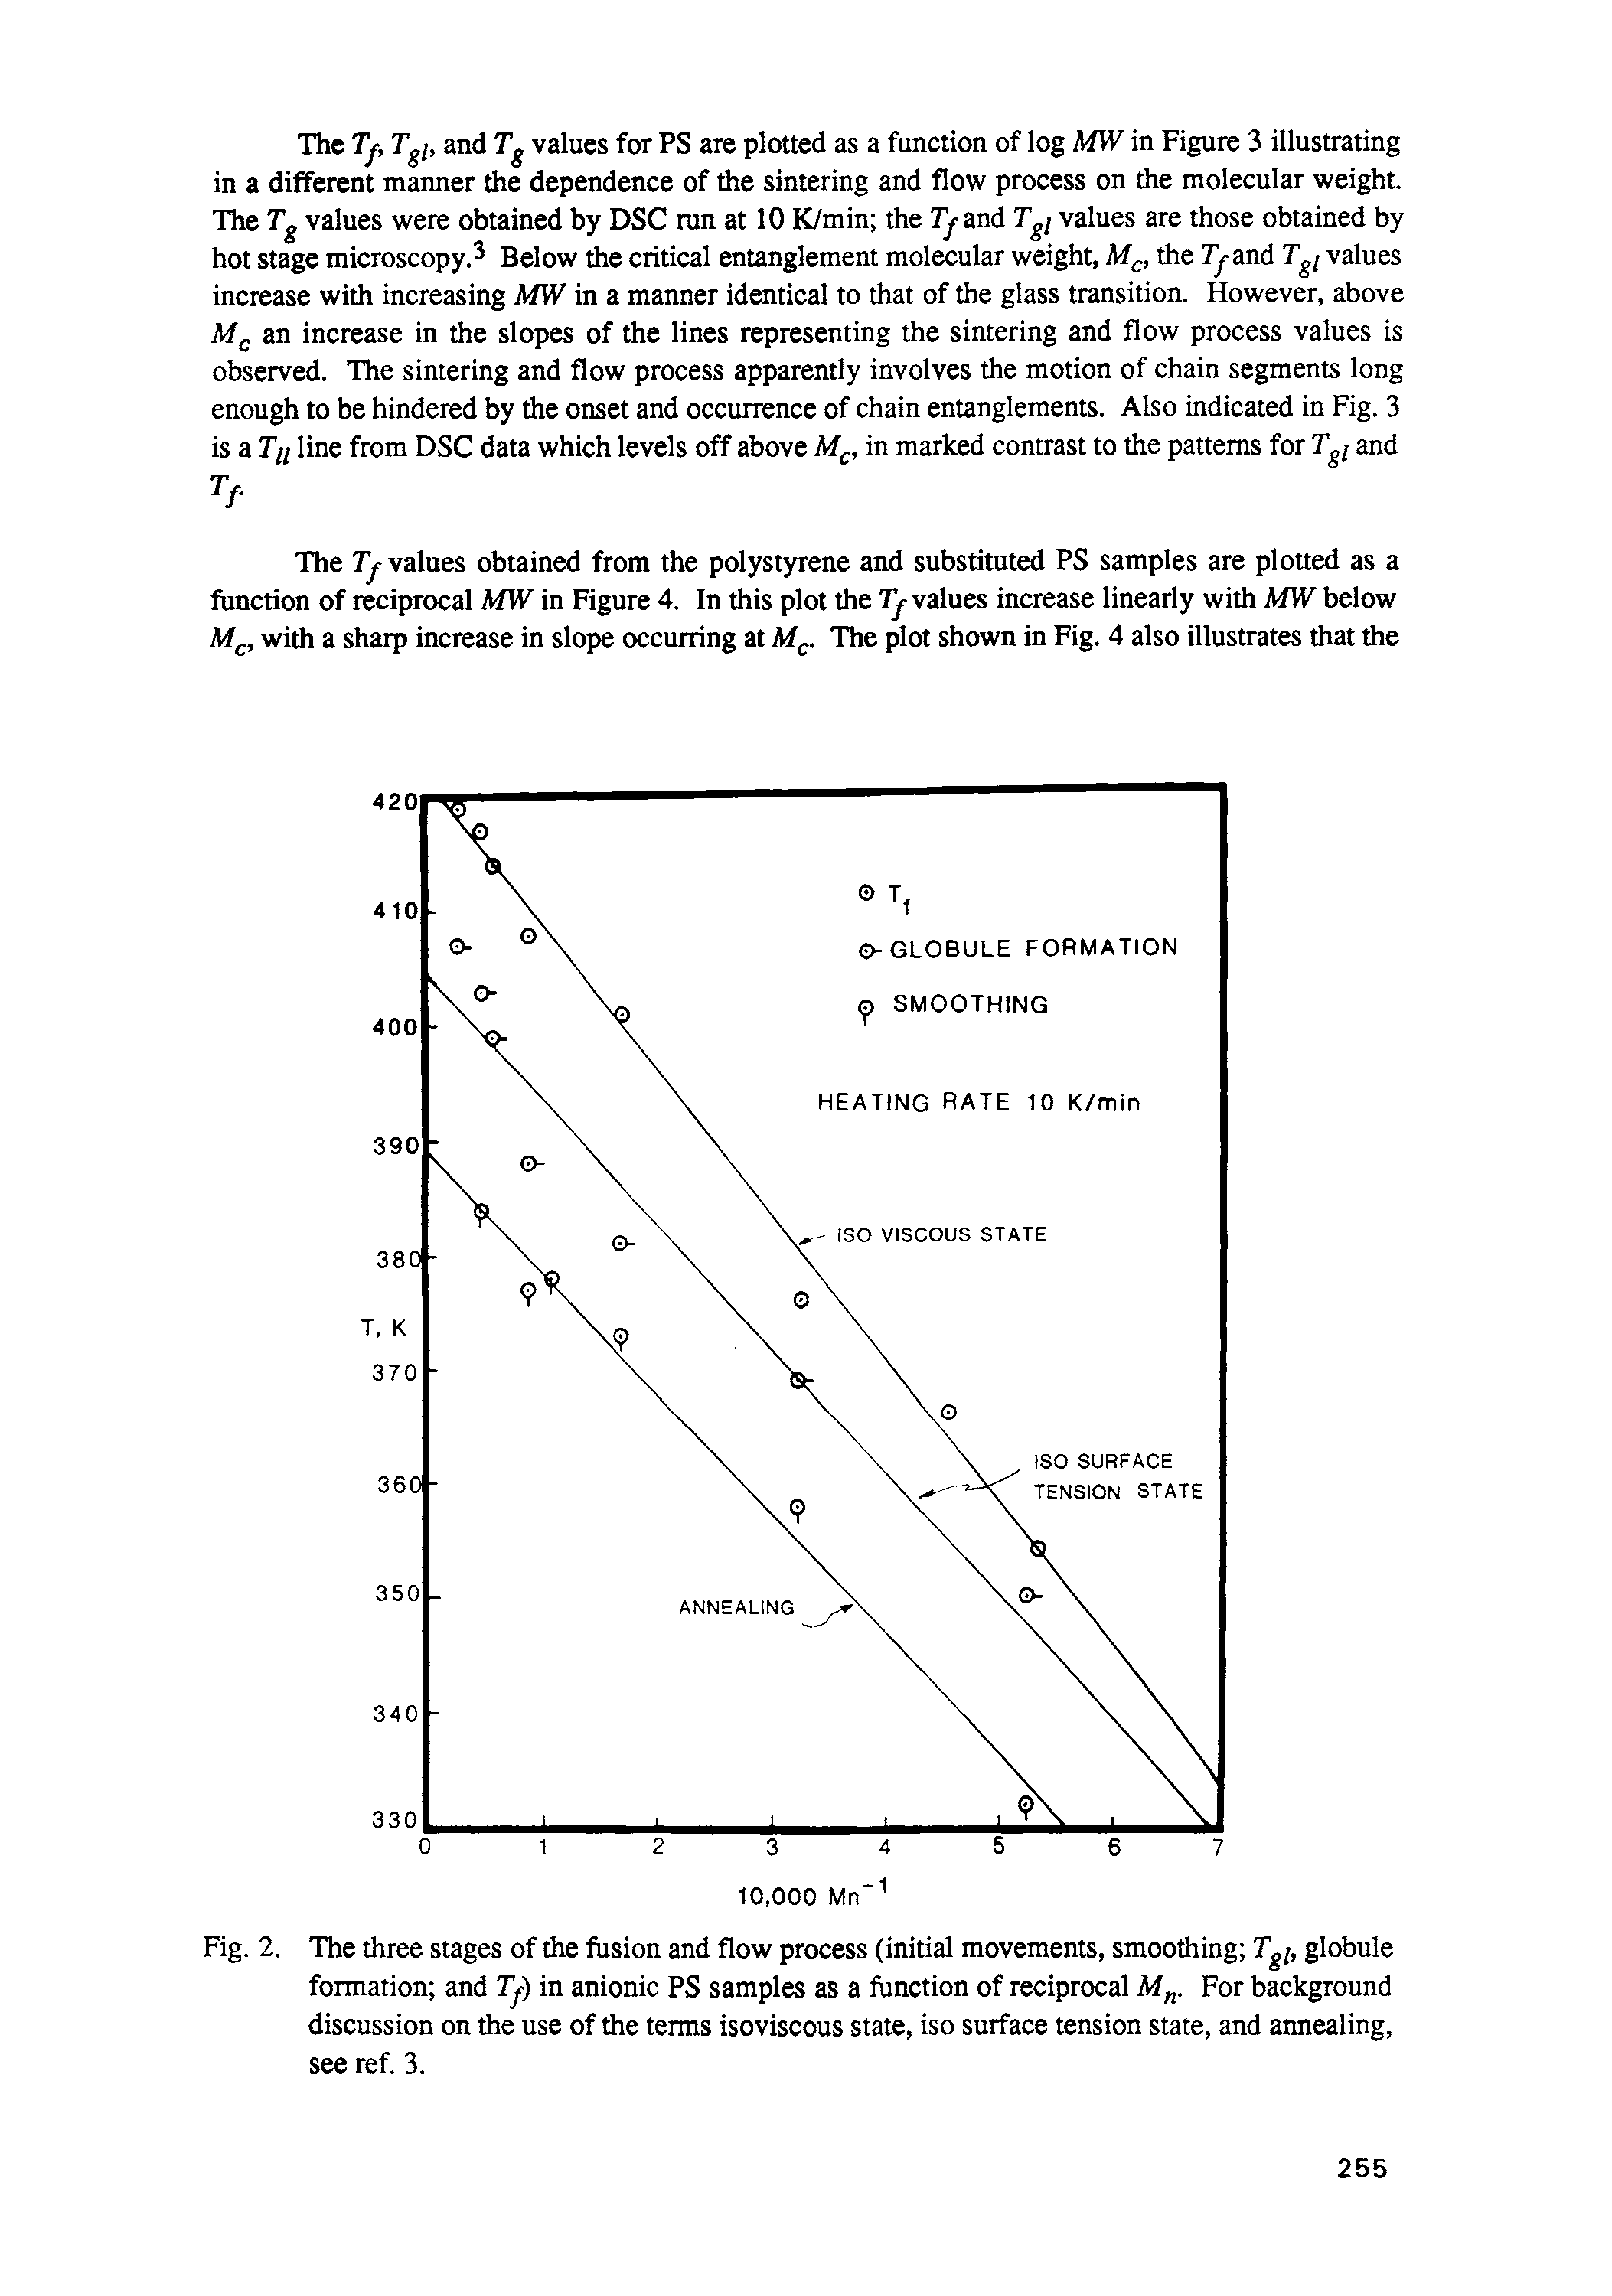 Fig. 2. The three stages of the fusion and flow process (initial movements, smoothing Tgi, globule formation and TJ) in anionic PS samples as a function of reciprocal M . For background discussion on the use of the terms isoviscous state, iso surface tension state, and annealing, see ref. 3.